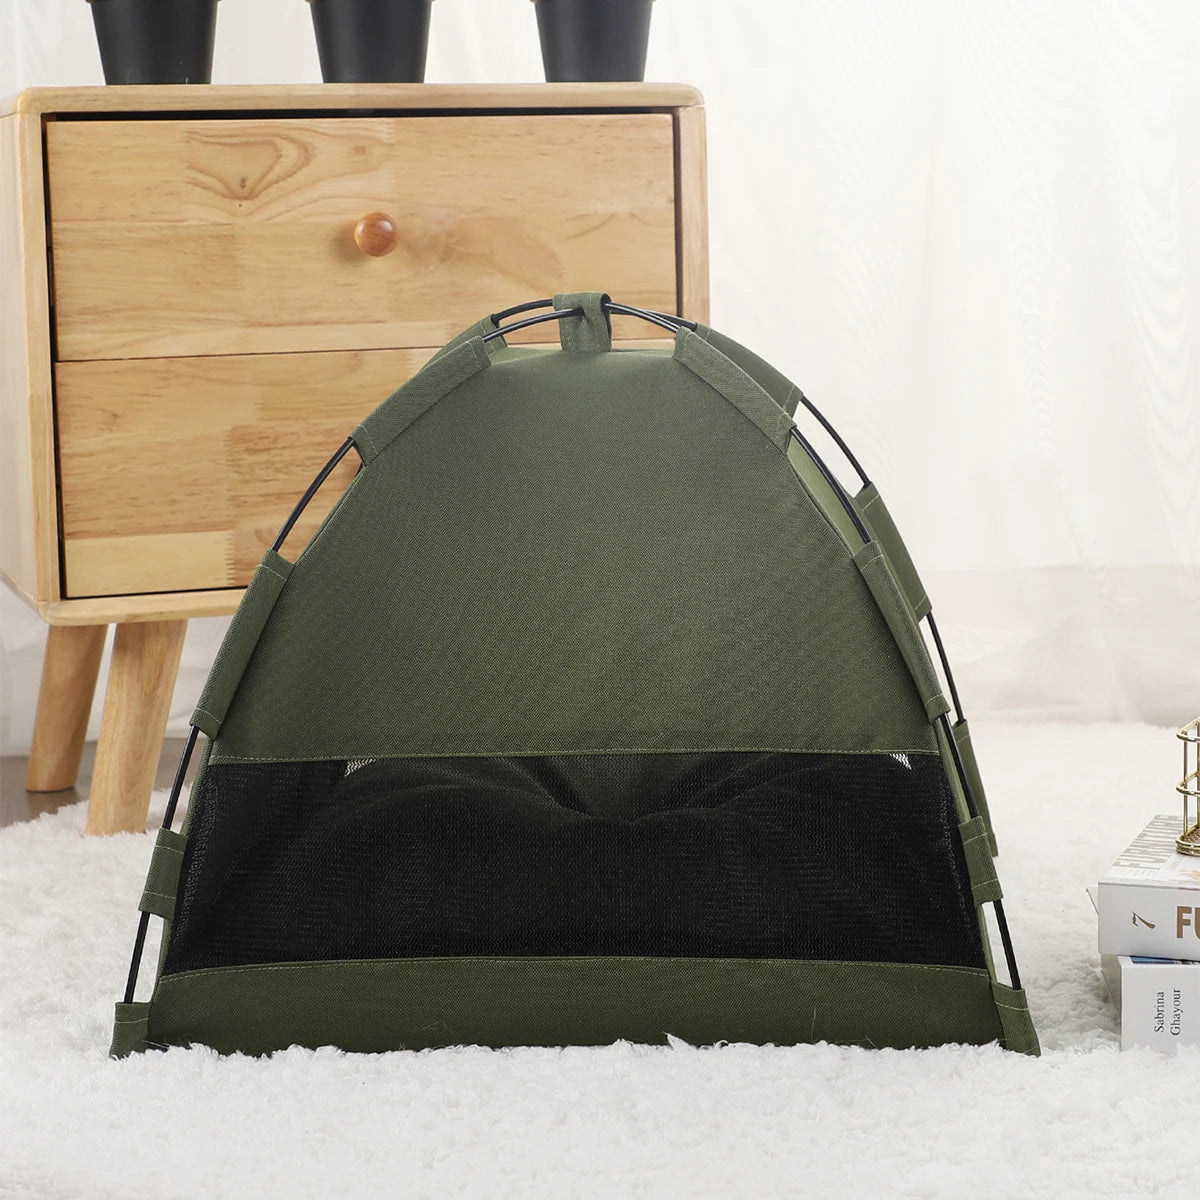 Tent House For Pets